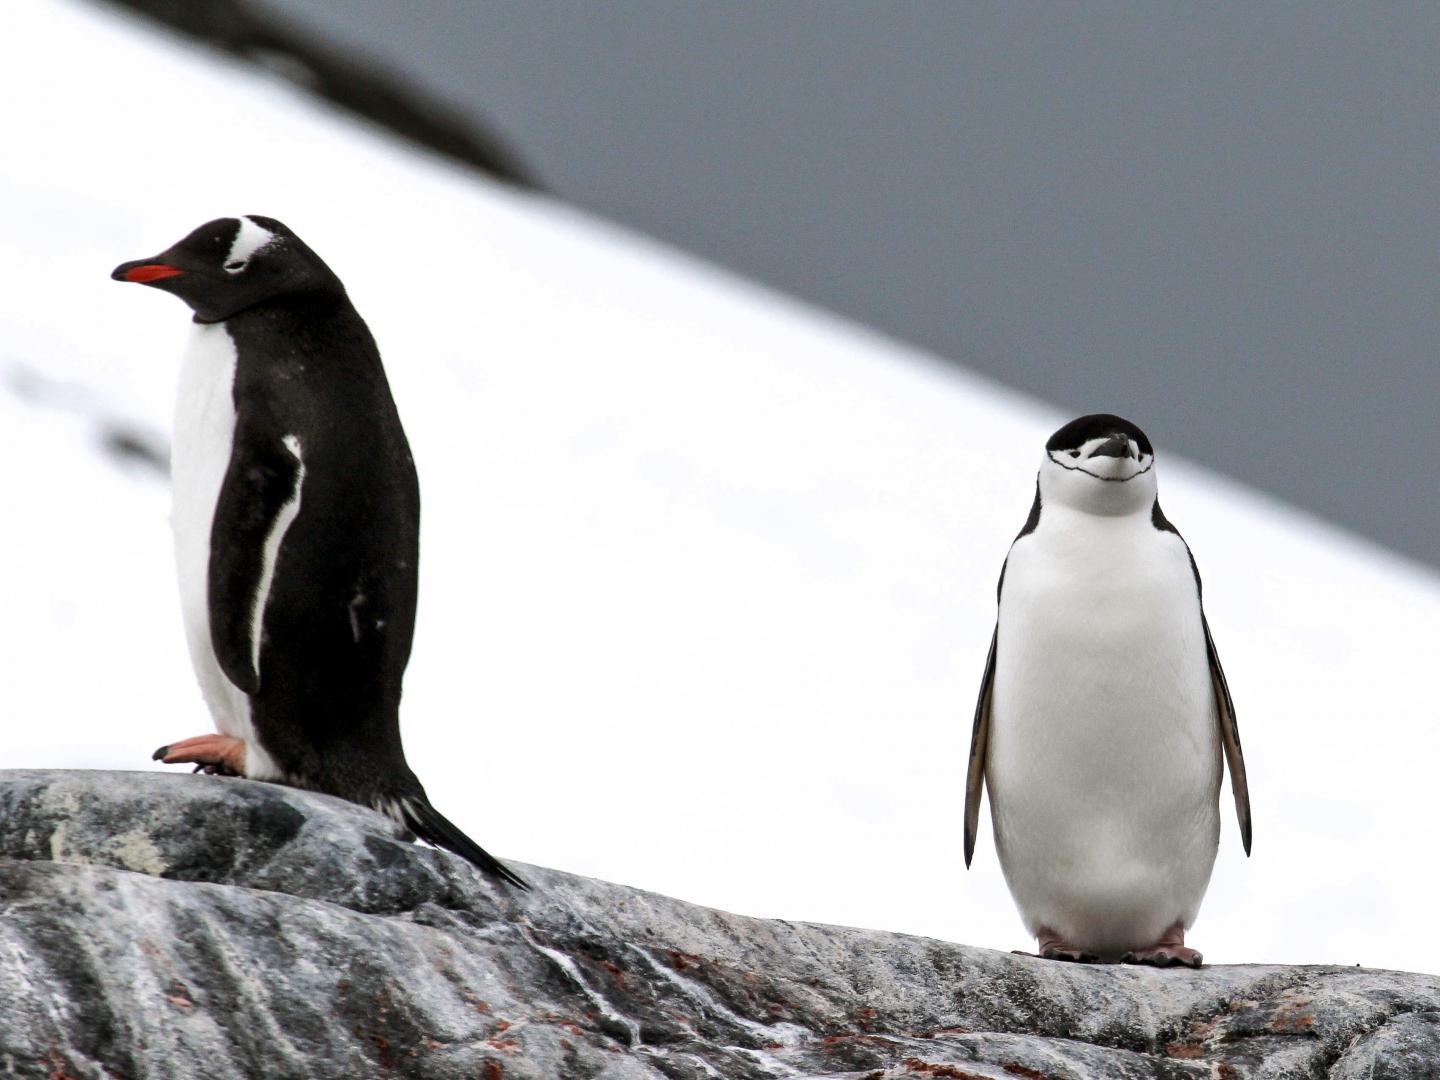 Gentoo and Chinstrap Penguins